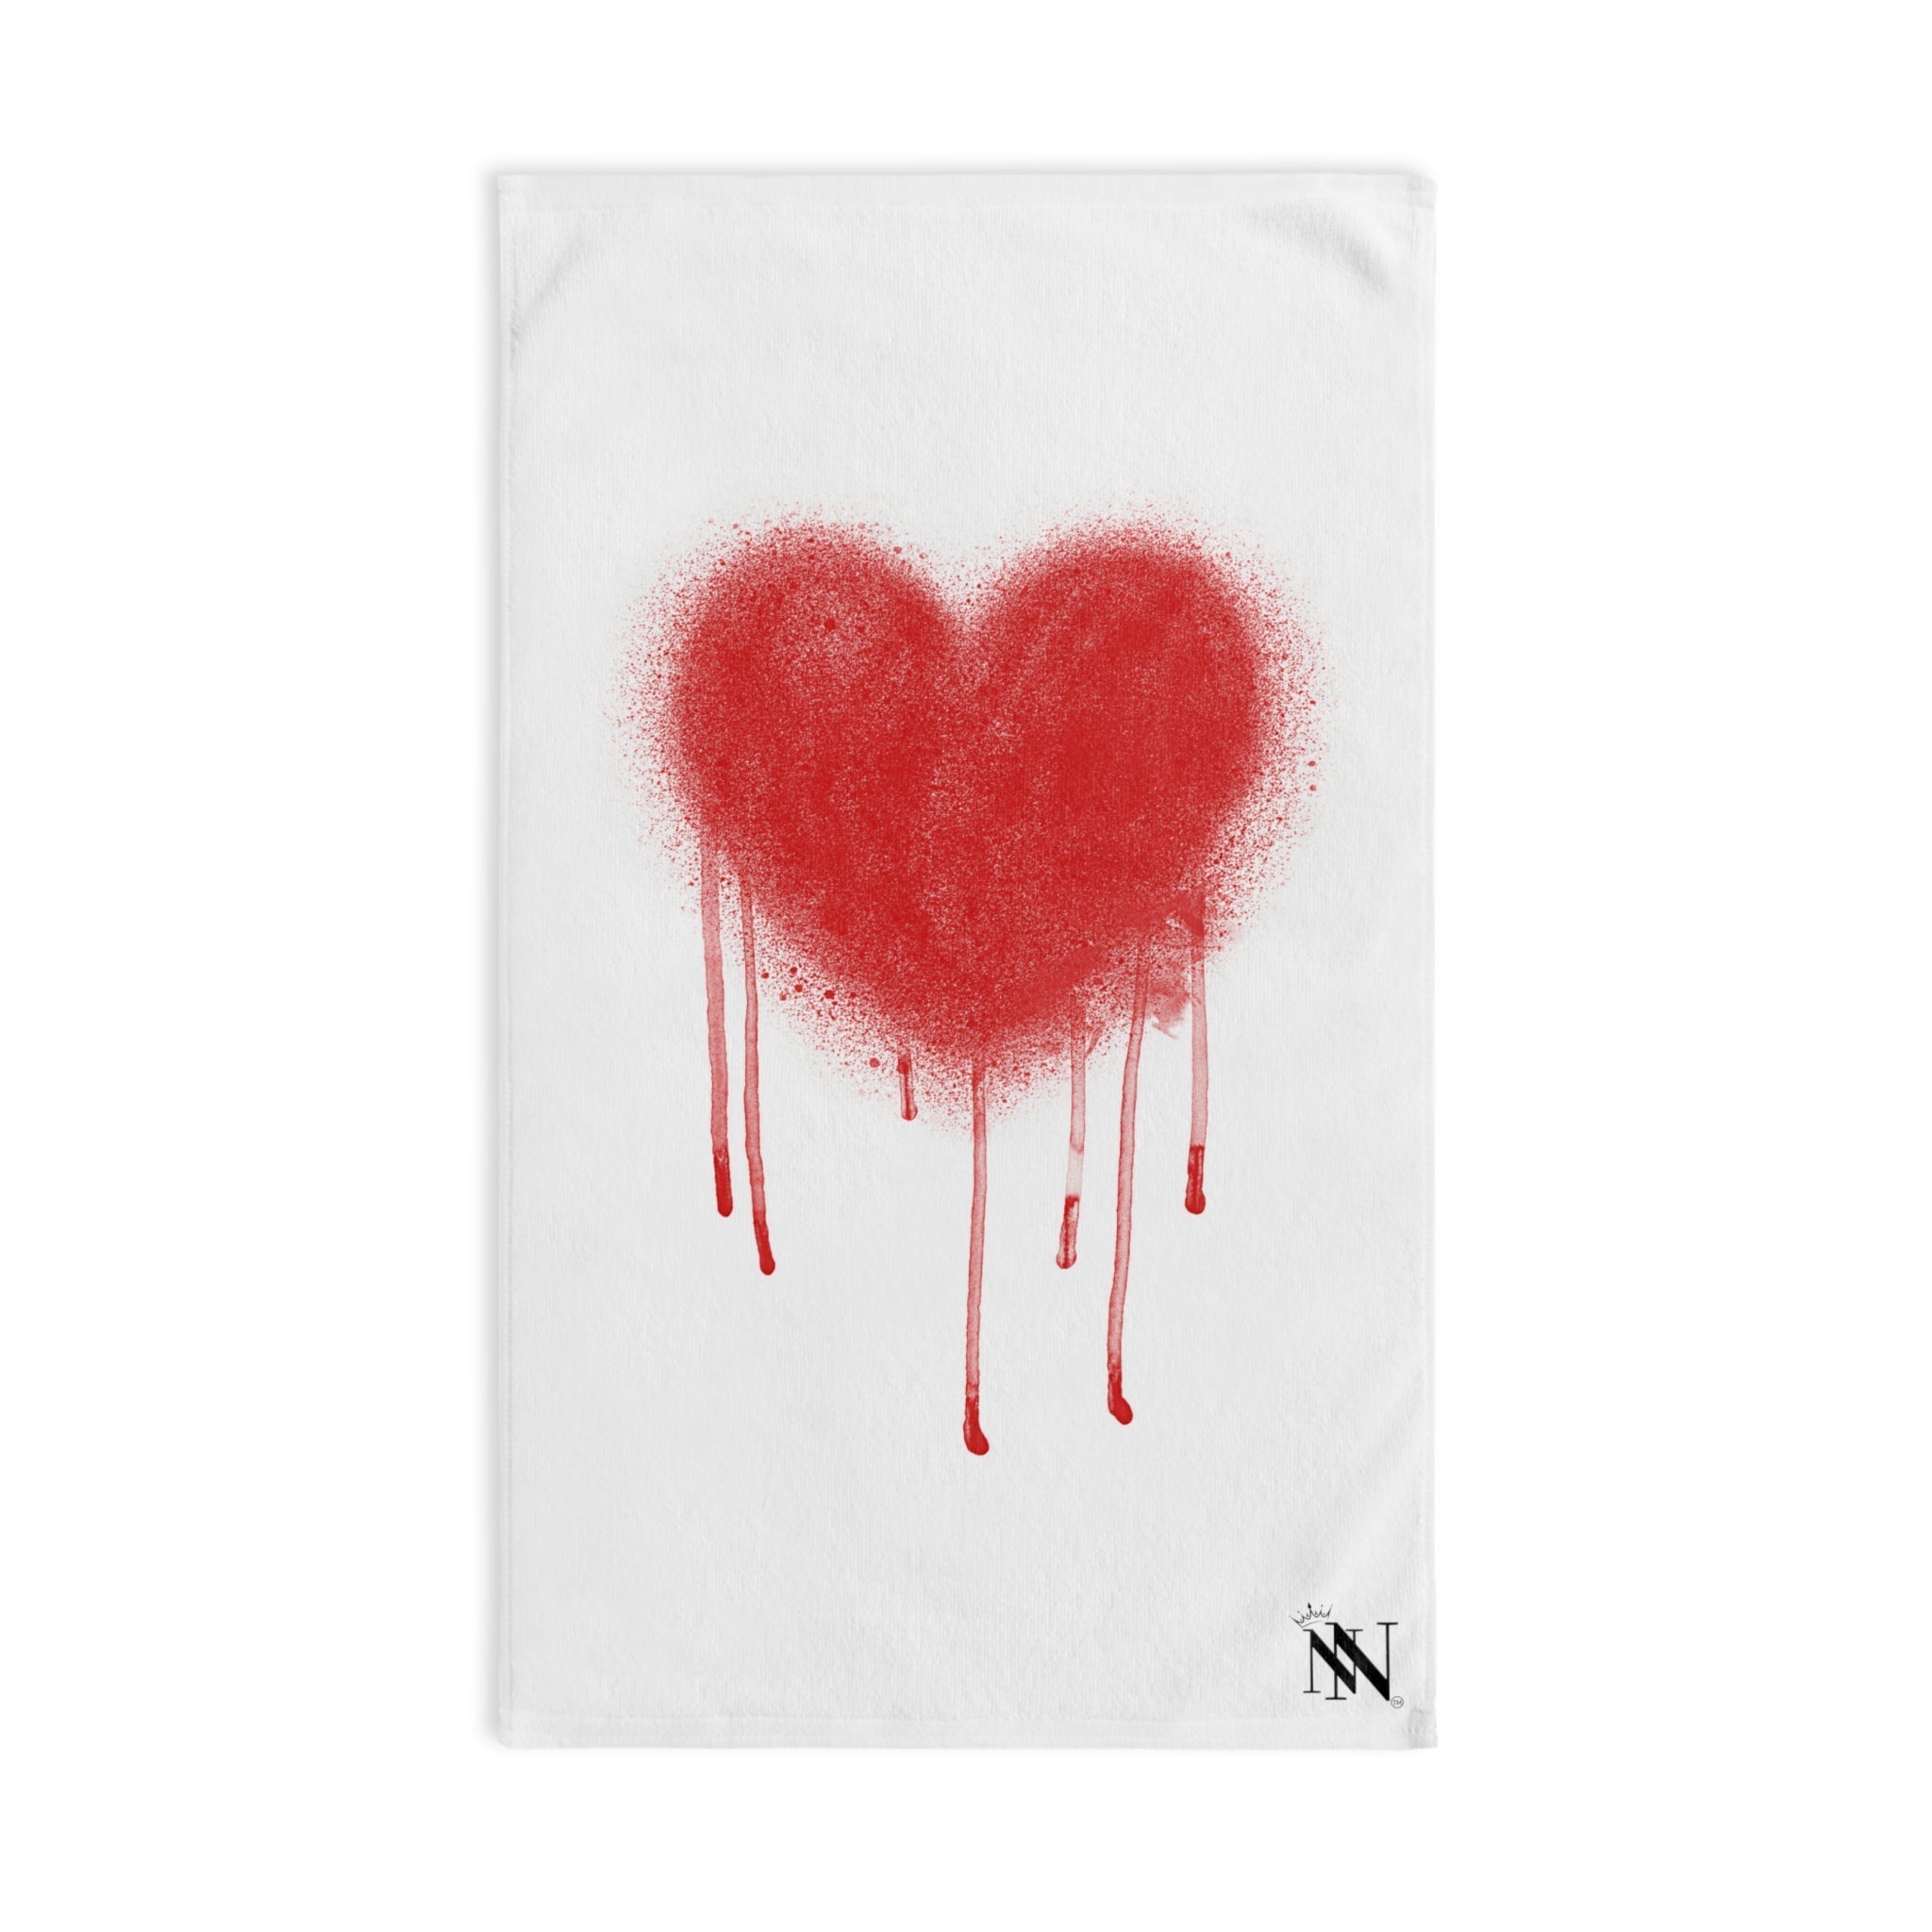 Drippy Paint Heart White | Funny Gifts for Men - Gifts for Him - Birthday Gifts for Men, Him, Her, Husband, Boyfriend, Girlfriend, New Couple Gifts, Fathers & Valentines Day Gifts, Christmas Gifts NECTAR NAPKINS